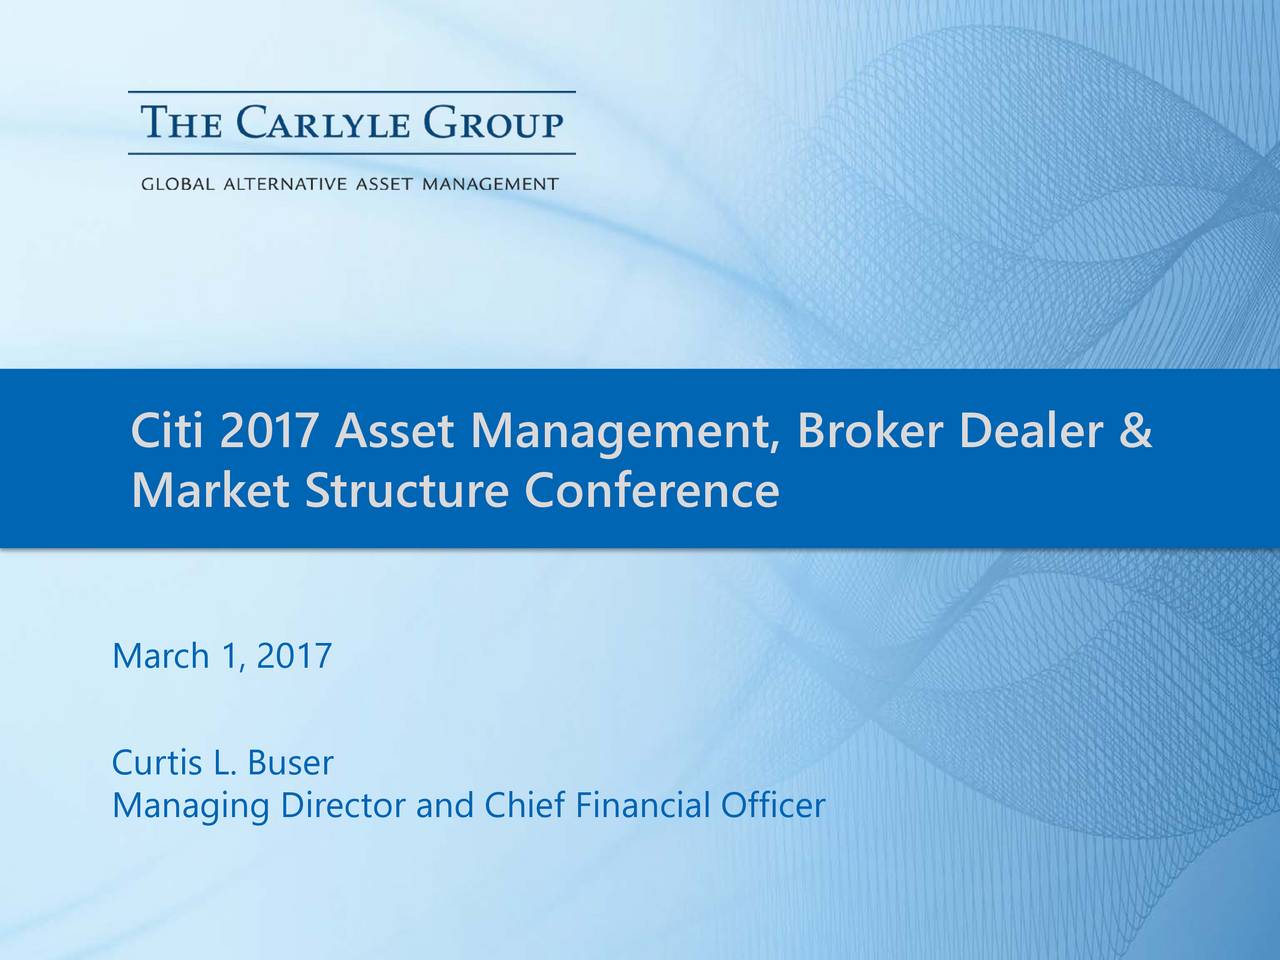 Market Structure Conference March 1, 2017 Curtis L. Buser Managing Director and Chief Financial Officer